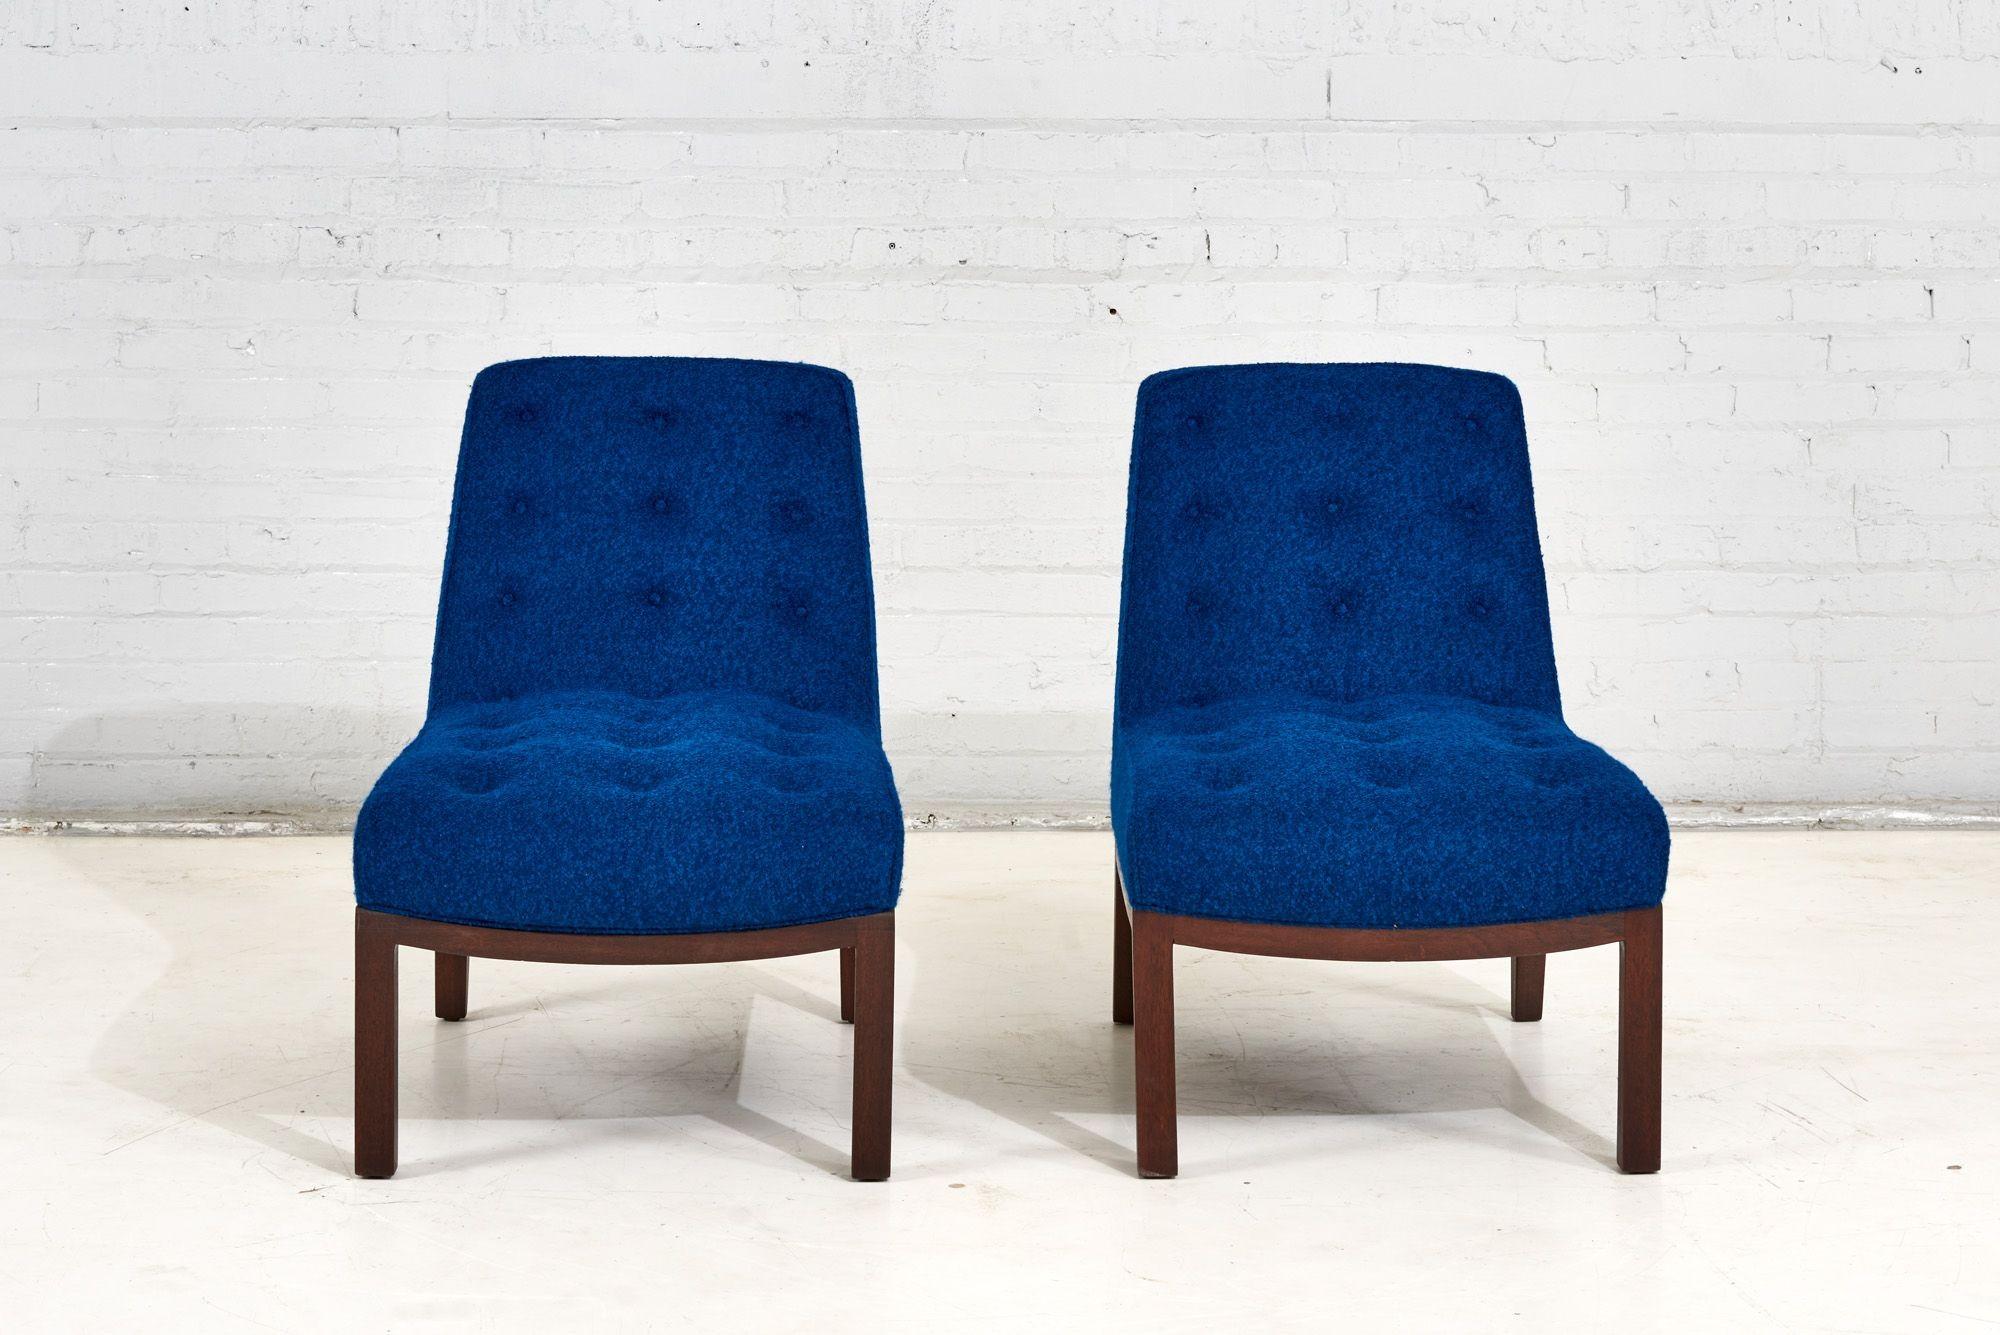 Pair Dunbar Lounge Slipper Chairs by Edward Wormley, 1960. Walnut legs restored and newly reupholstered in blue boucle.